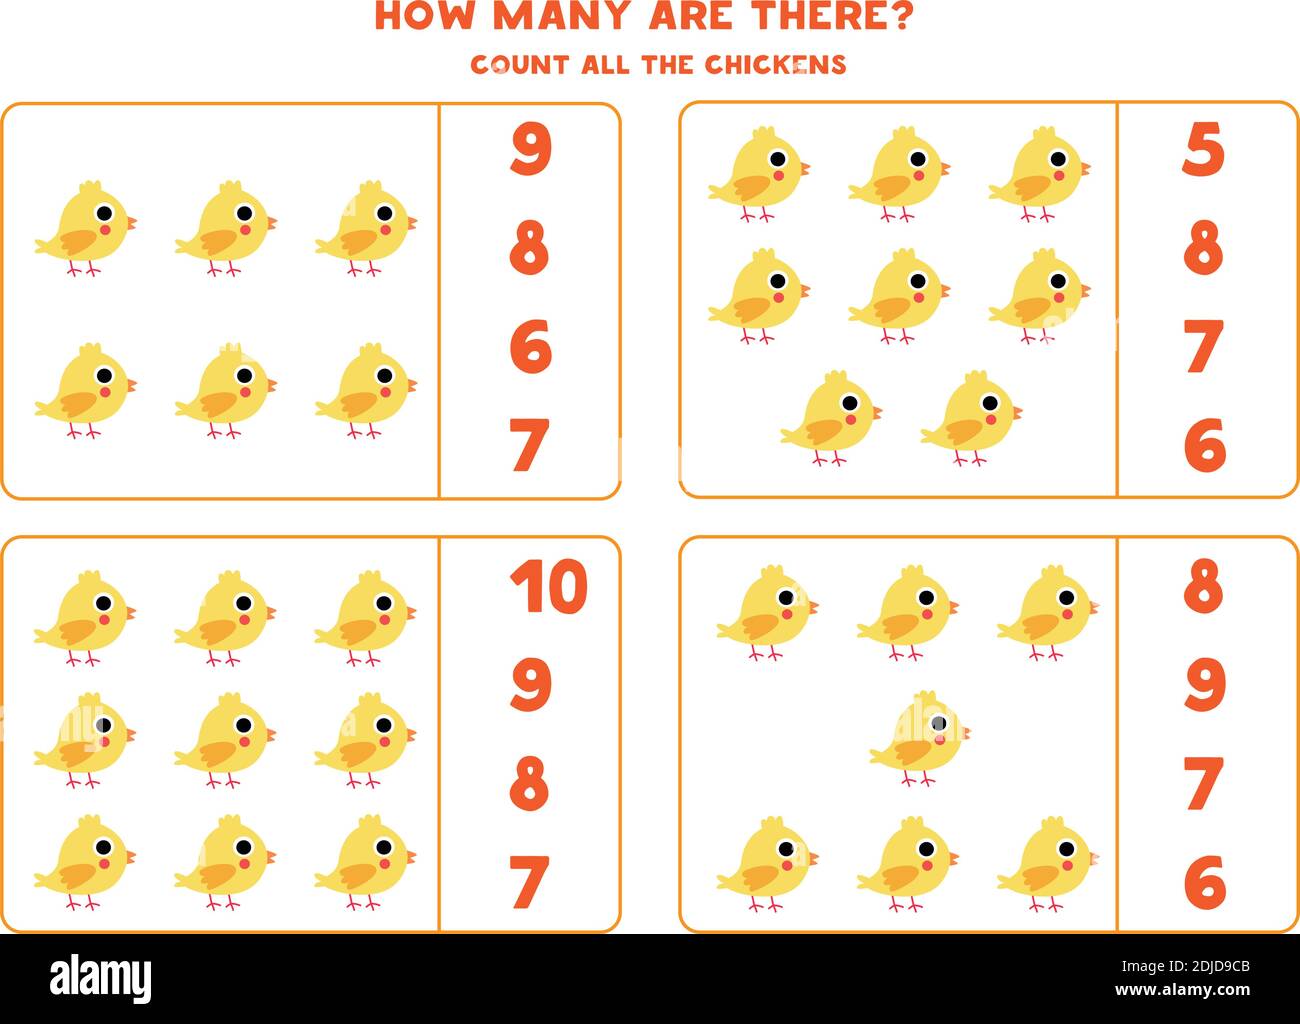 Count all chickens and match with correct answer. Educational math game for kids. Stock Vector